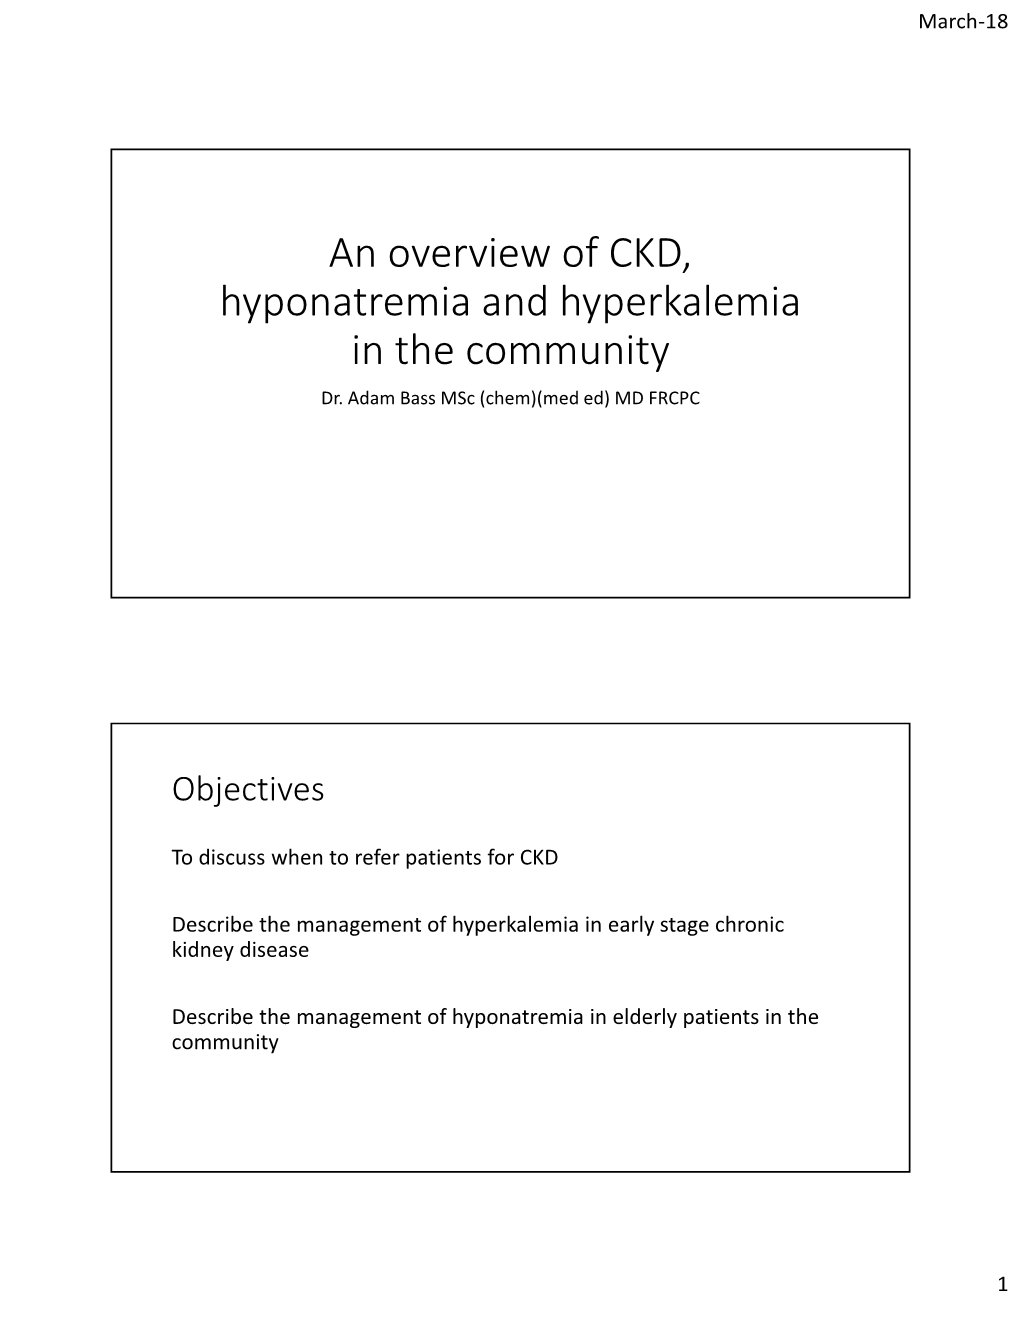 An Overview of CKD, Hyponatremia and Hyperkalemia in the Community Dr